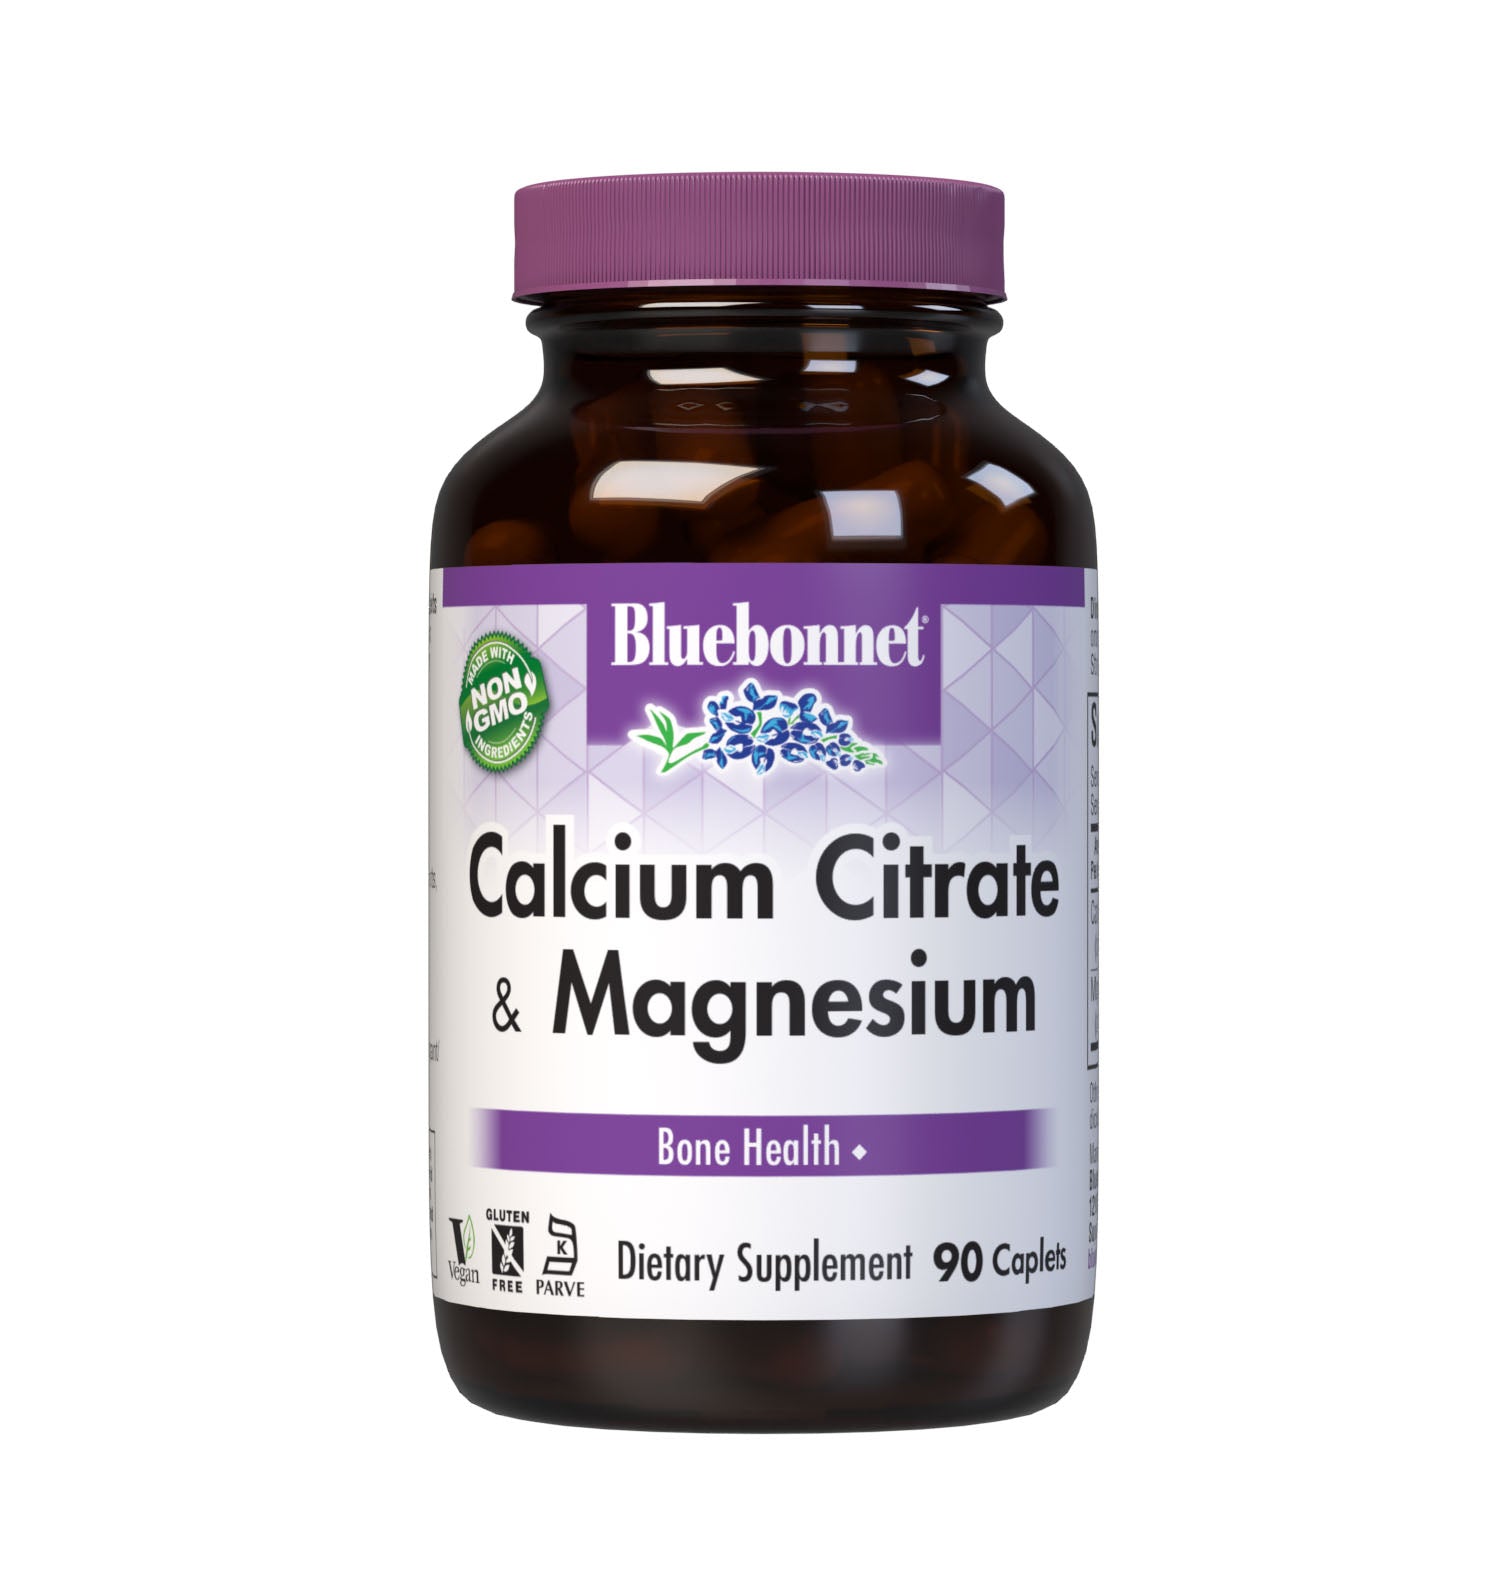 Bluebonnet's Calcium Citrate & Magnesium 90 Caplets are formulated with calcium in a chelate of calcium citrate and magnesium from reacted magnesium aspartate for strong, healthy bones. #size_90 count